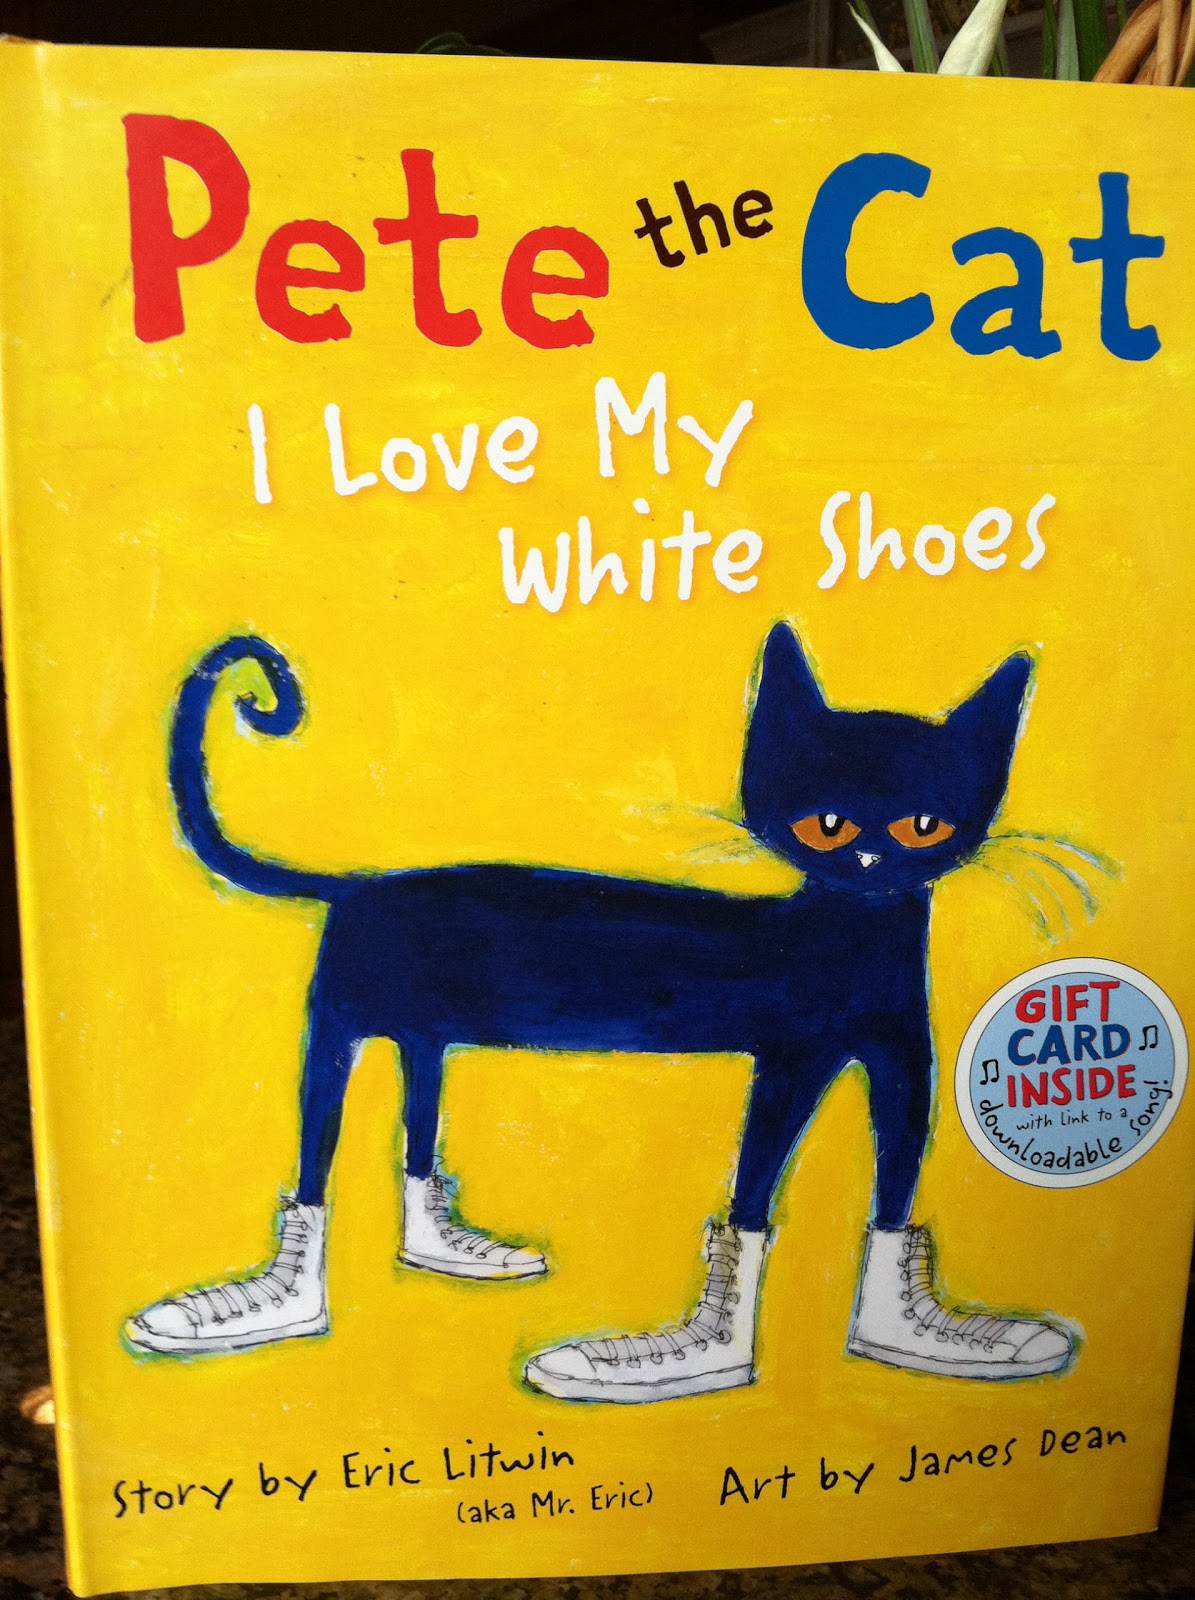 Pete The Cat I Love My White Shoes Eric Litwin (aka Ask Mr. Eric)